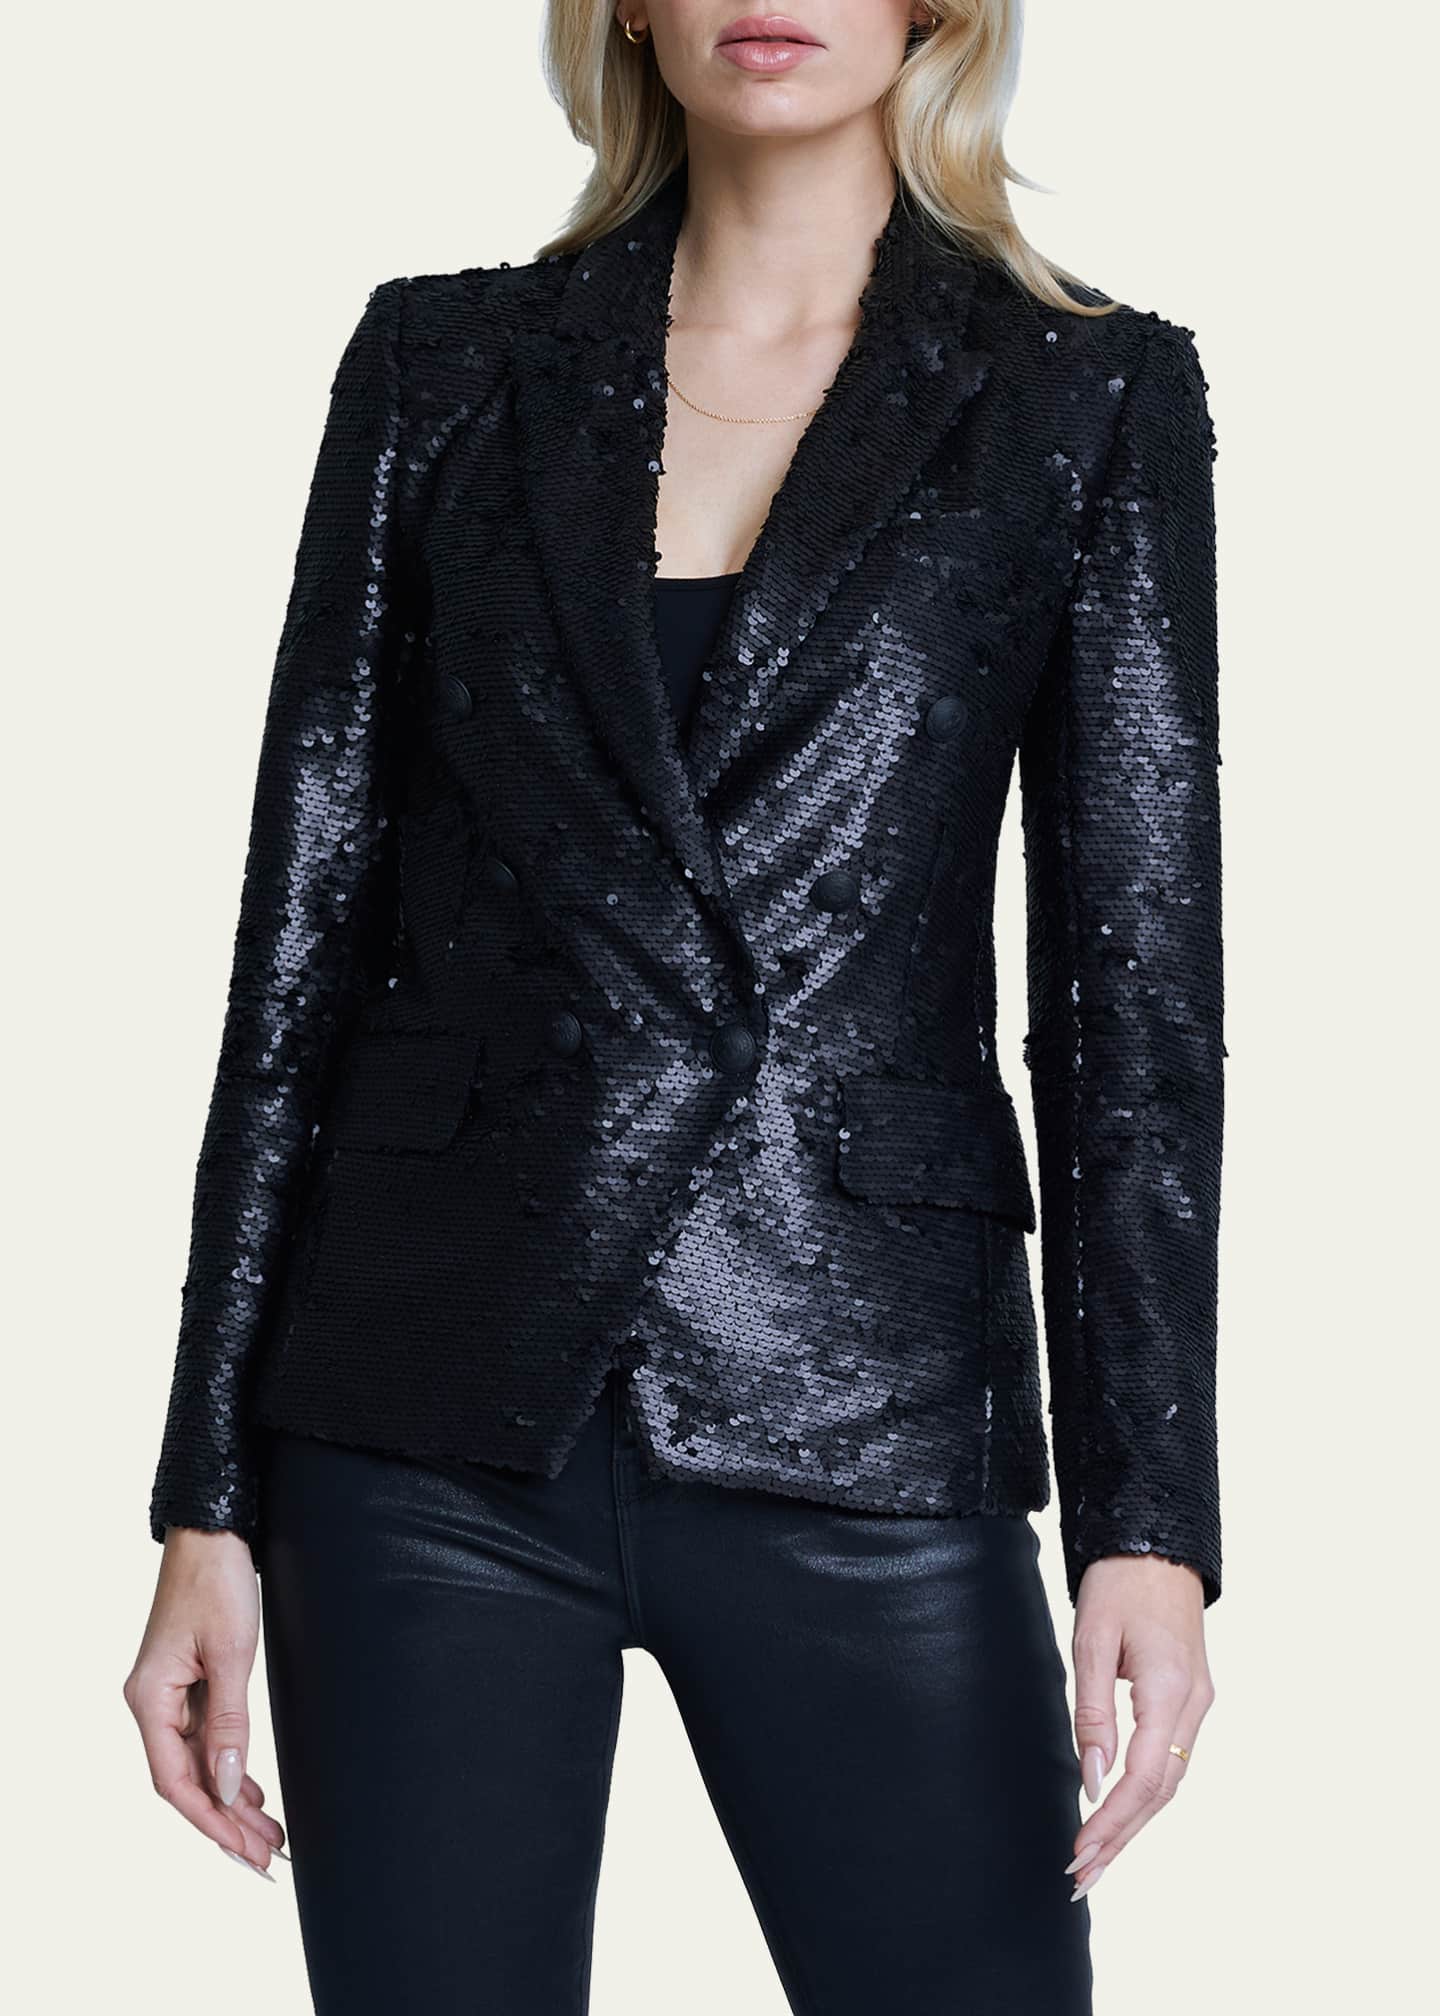 L'Agence Kenzie Sequined Double-Breasted Blazer - Bergdorf Goodman